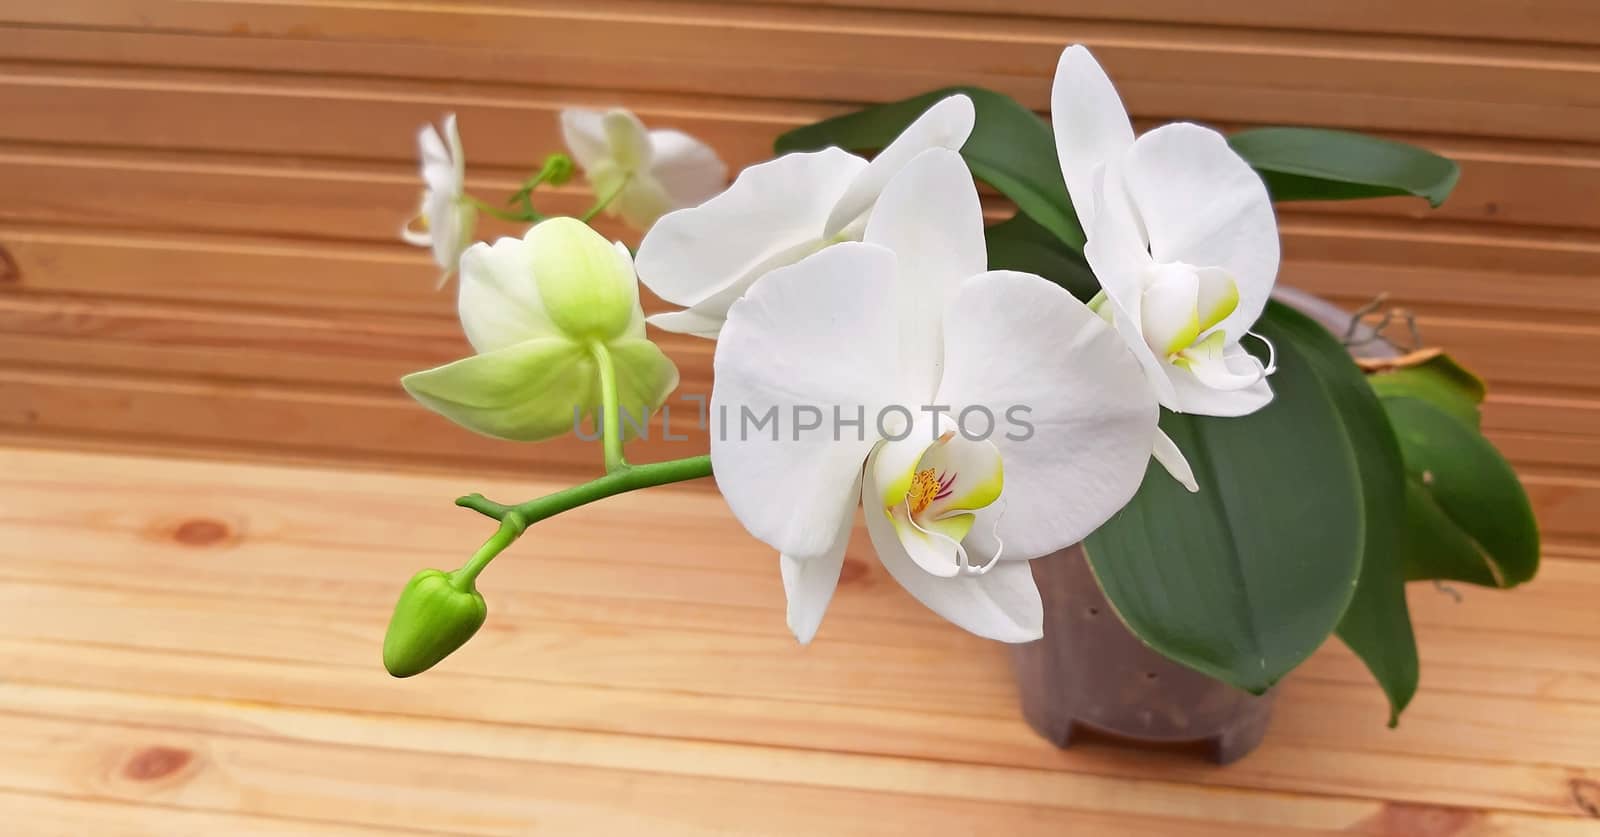 White Phalaenopsis Orchid in bloom on wooden background.